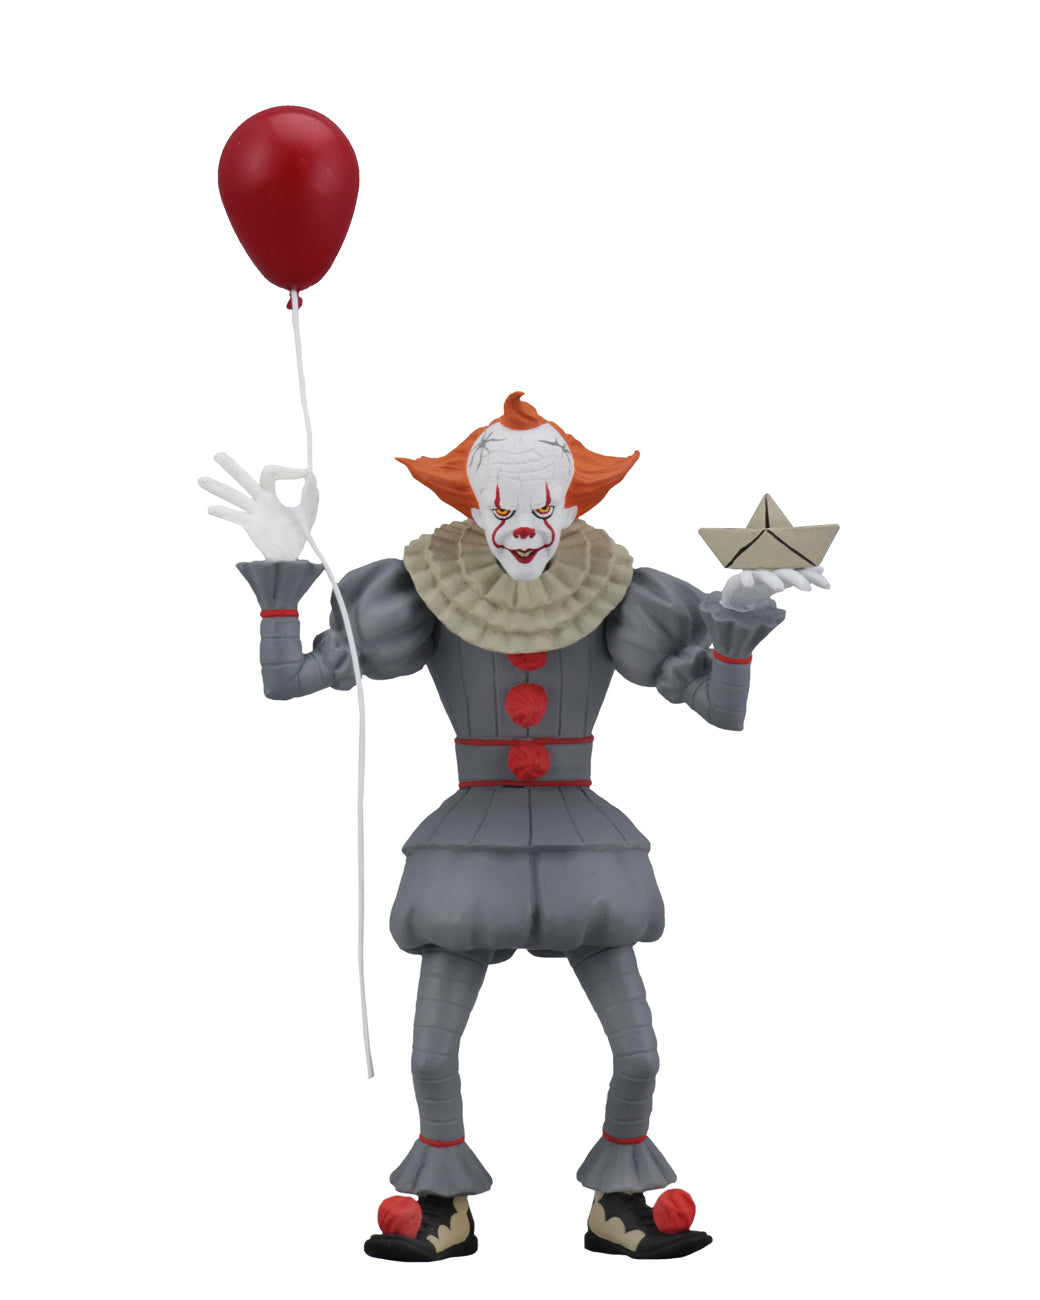 NECA - Toony Terrors Pennywise (IT 2017) 6" Action Figure - Zlc Collectibles